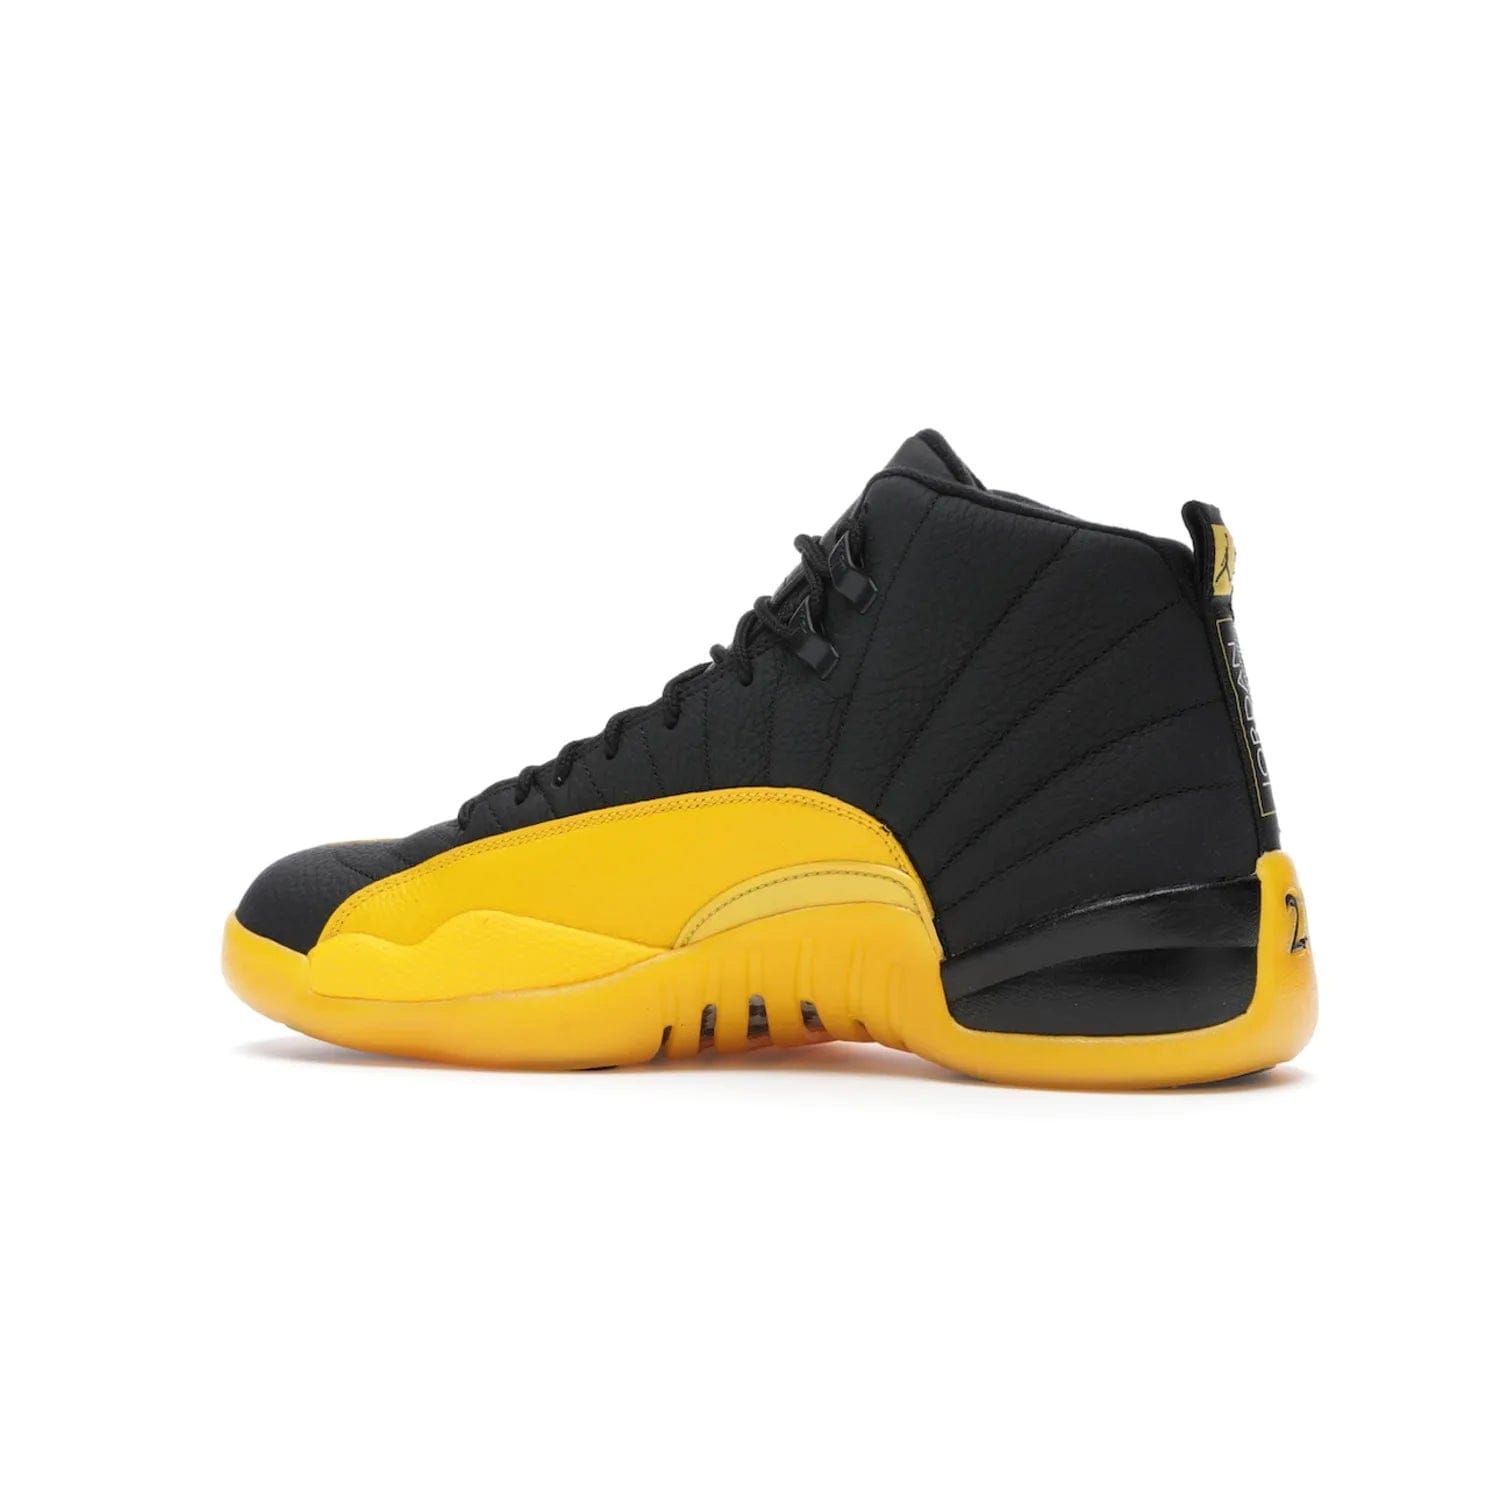 Jordan 12 Retro Black University Gold - Image 21 - Only at www.BallersClubKickz.com - This Jordan 12 Retro features a black tumbled leather upper and University Gold accents for a modern twist. Boasting Jordan "Two Three" branding and a yellow sole, these shoes will elevate your wardrobe. Fresh, sleek, and one of a kind - the Jordan 12 University Gold is your summer sneaker.